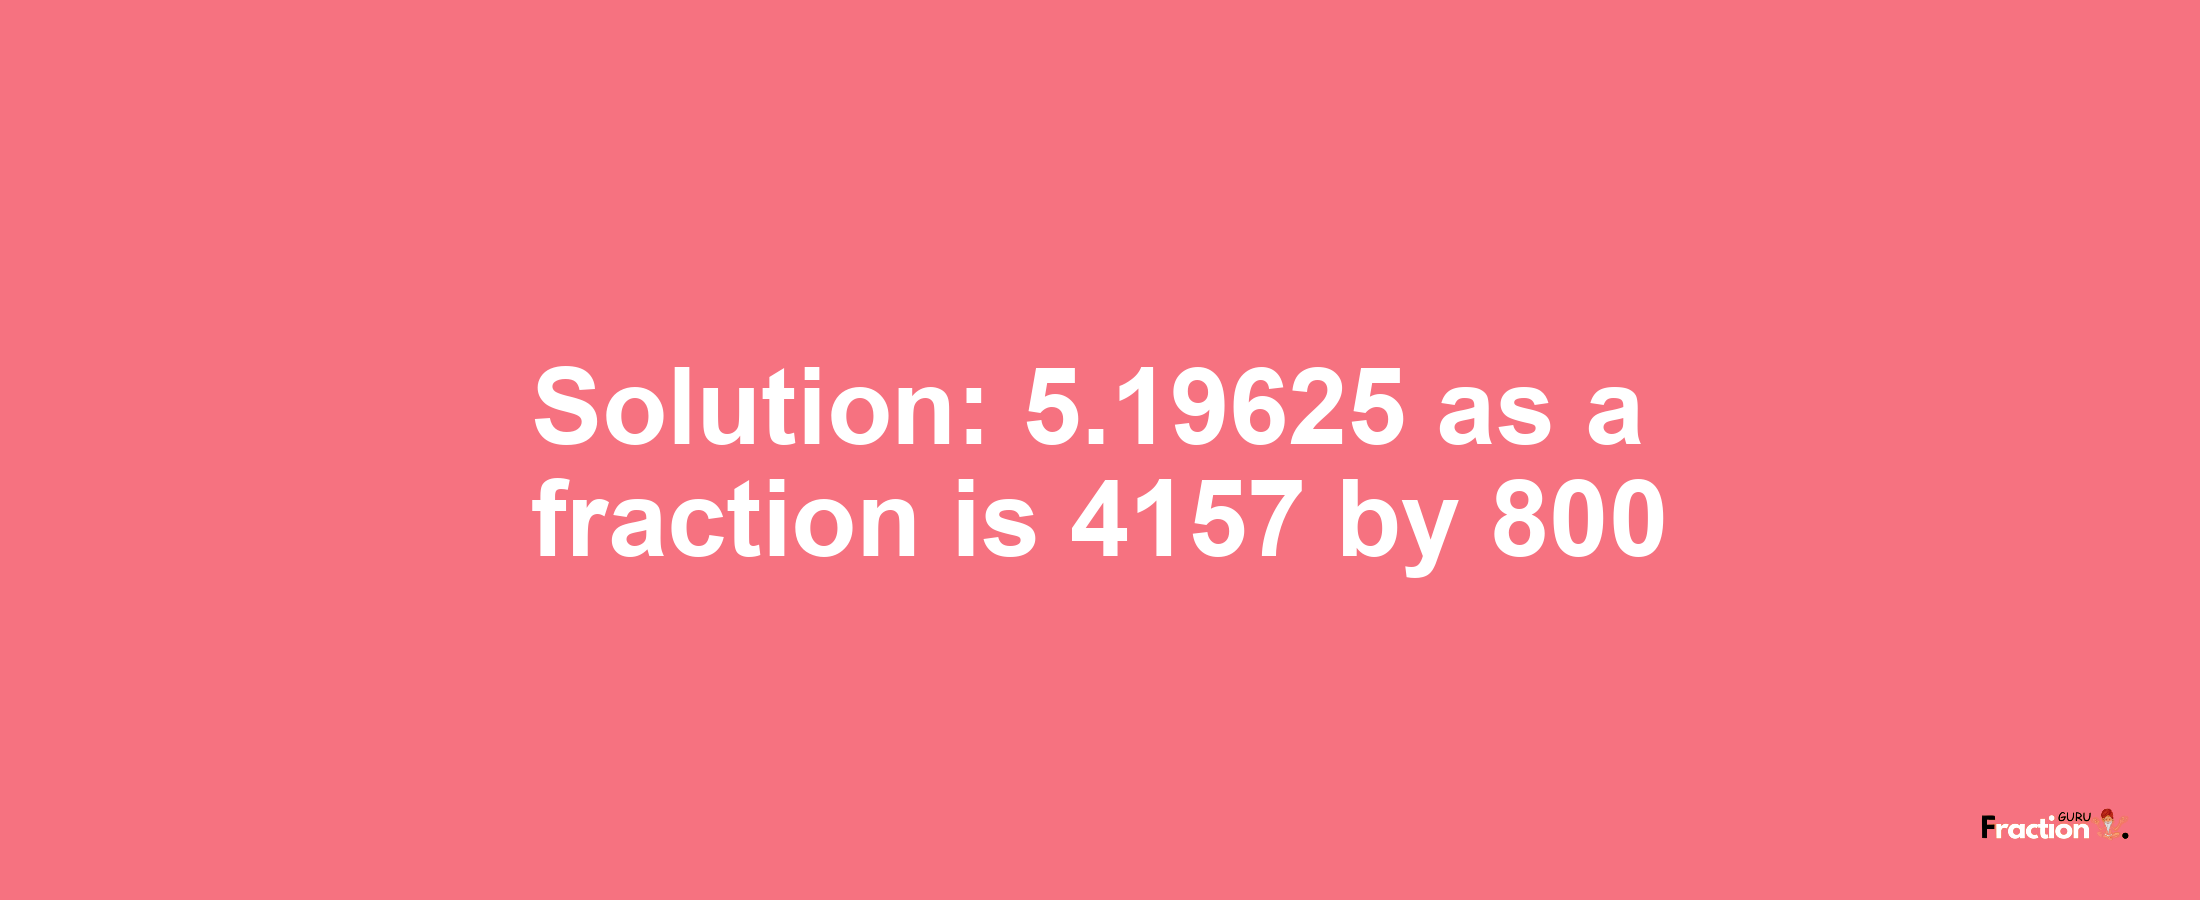 Solution:5.19625 as a fraction is 4157/800